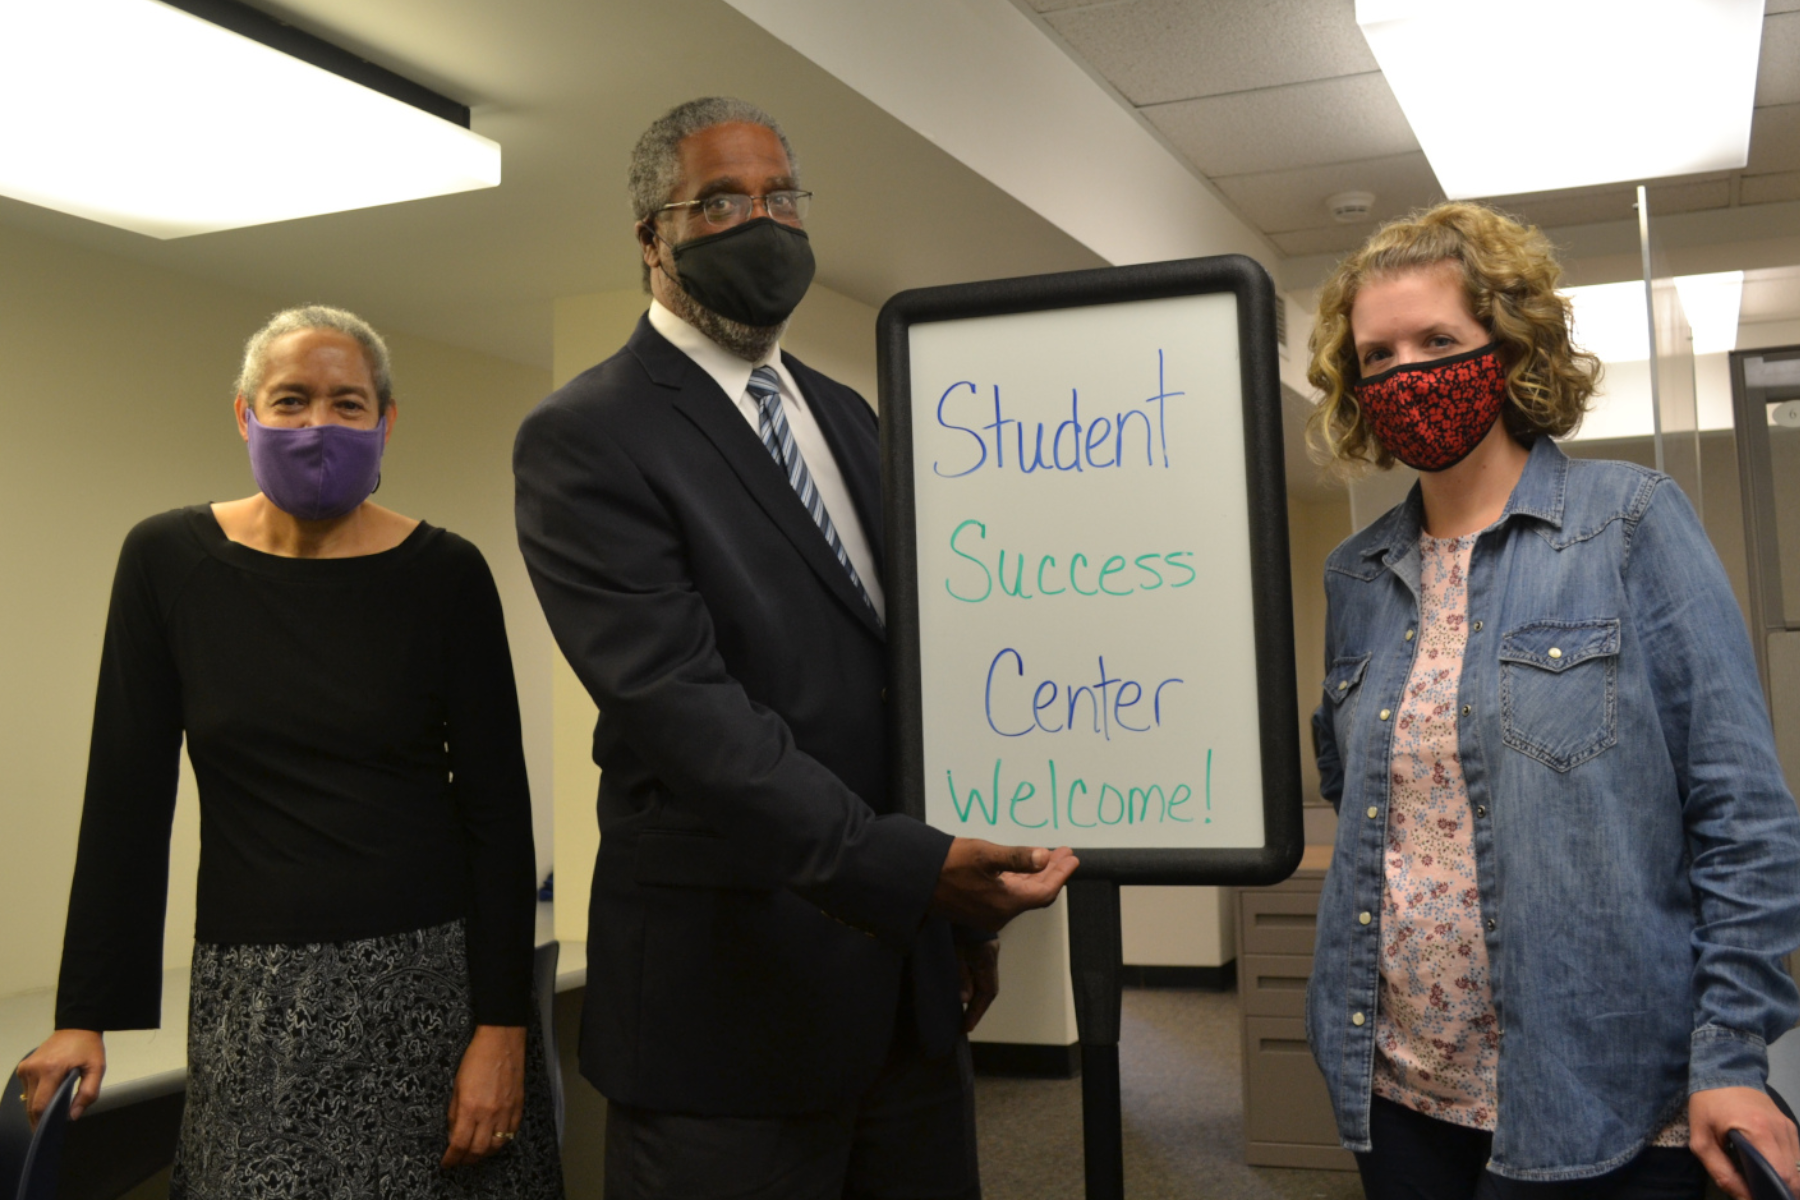 Student Success Coaches standing in Student Success Center with Student Success Center sign